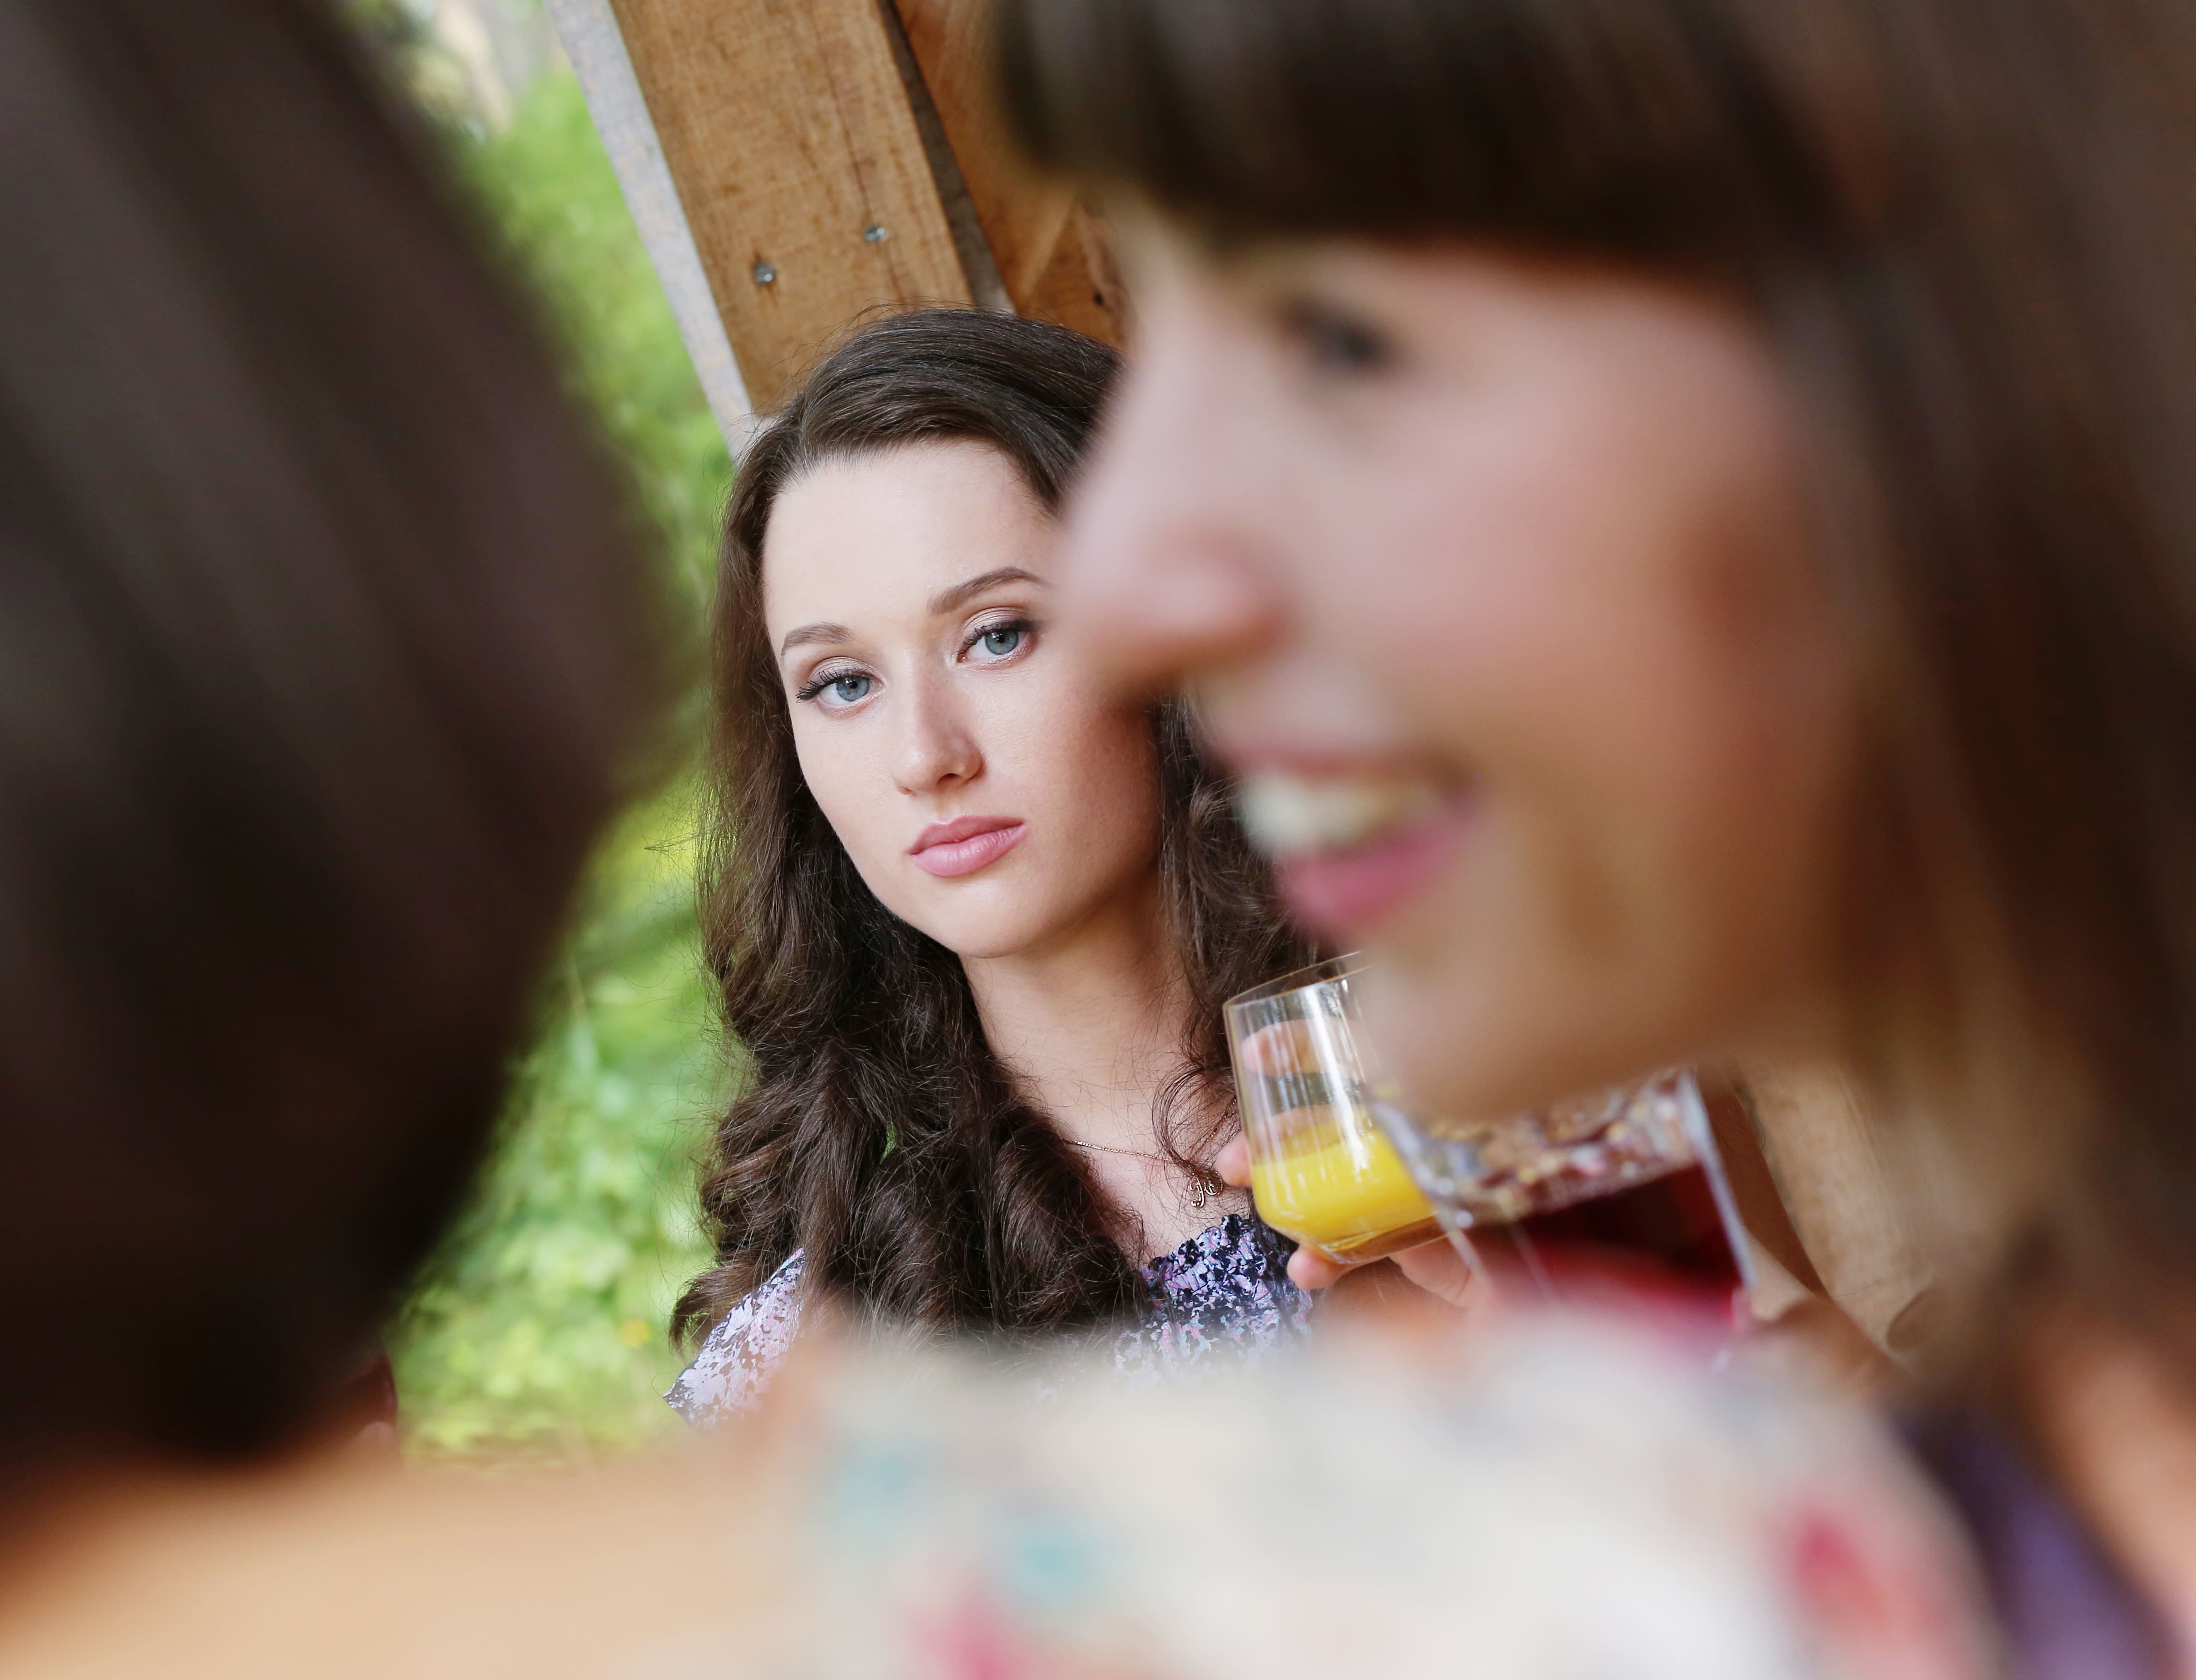 A thoughtful young woman gazes into the distance while in conversation with friends at an outdoor gathering.